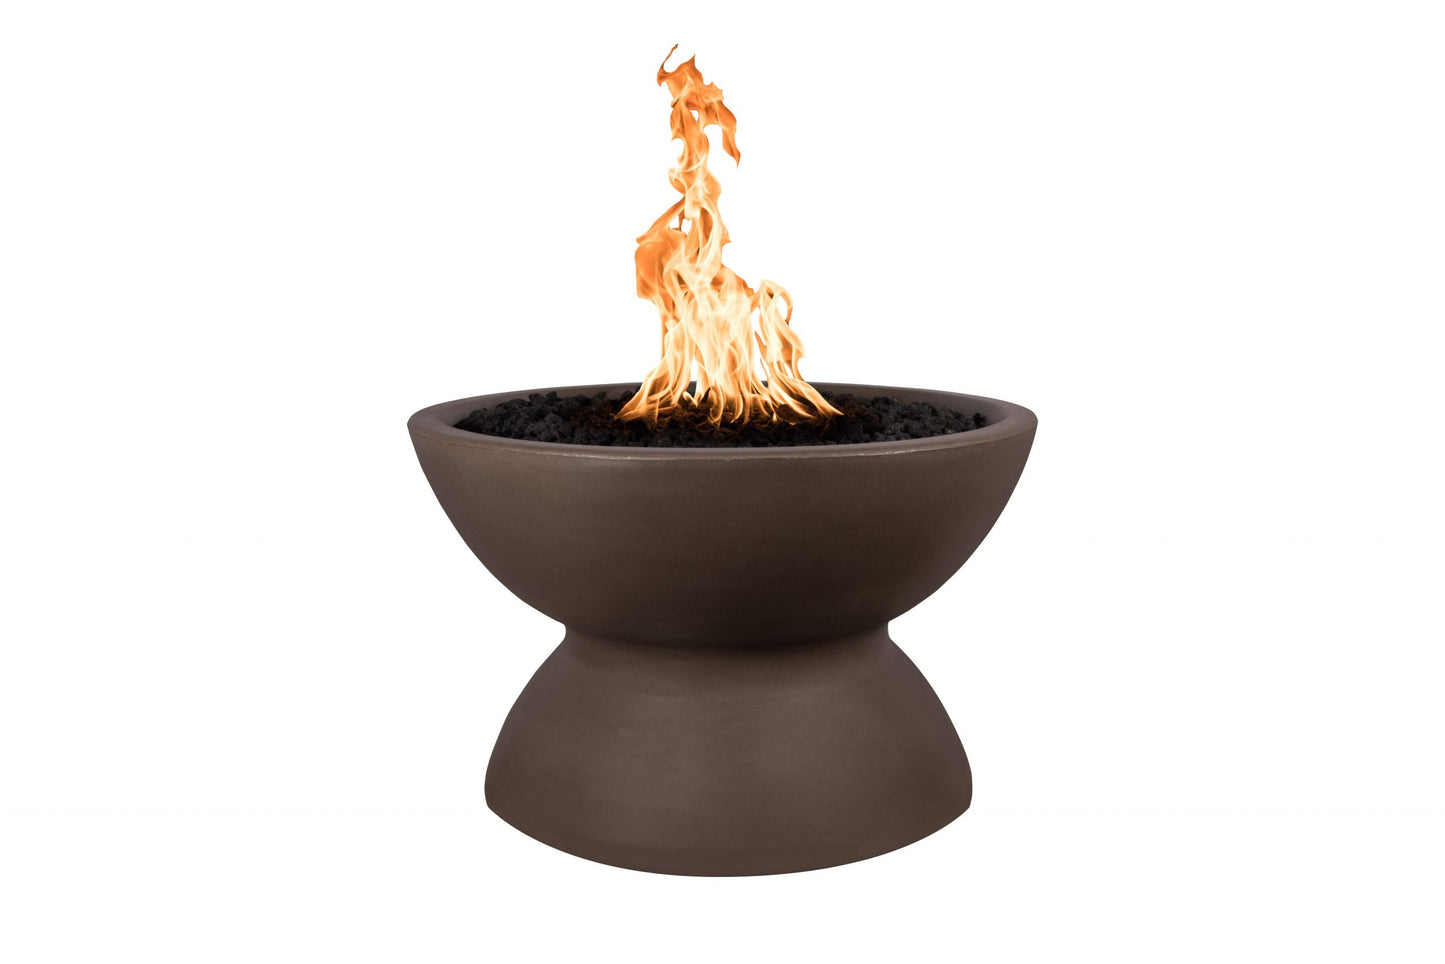 The Outdoor Plus Round Copa 33" Gray GFRC Concrete Liquid Propane Fire Pit with 110V Electronic Ignition